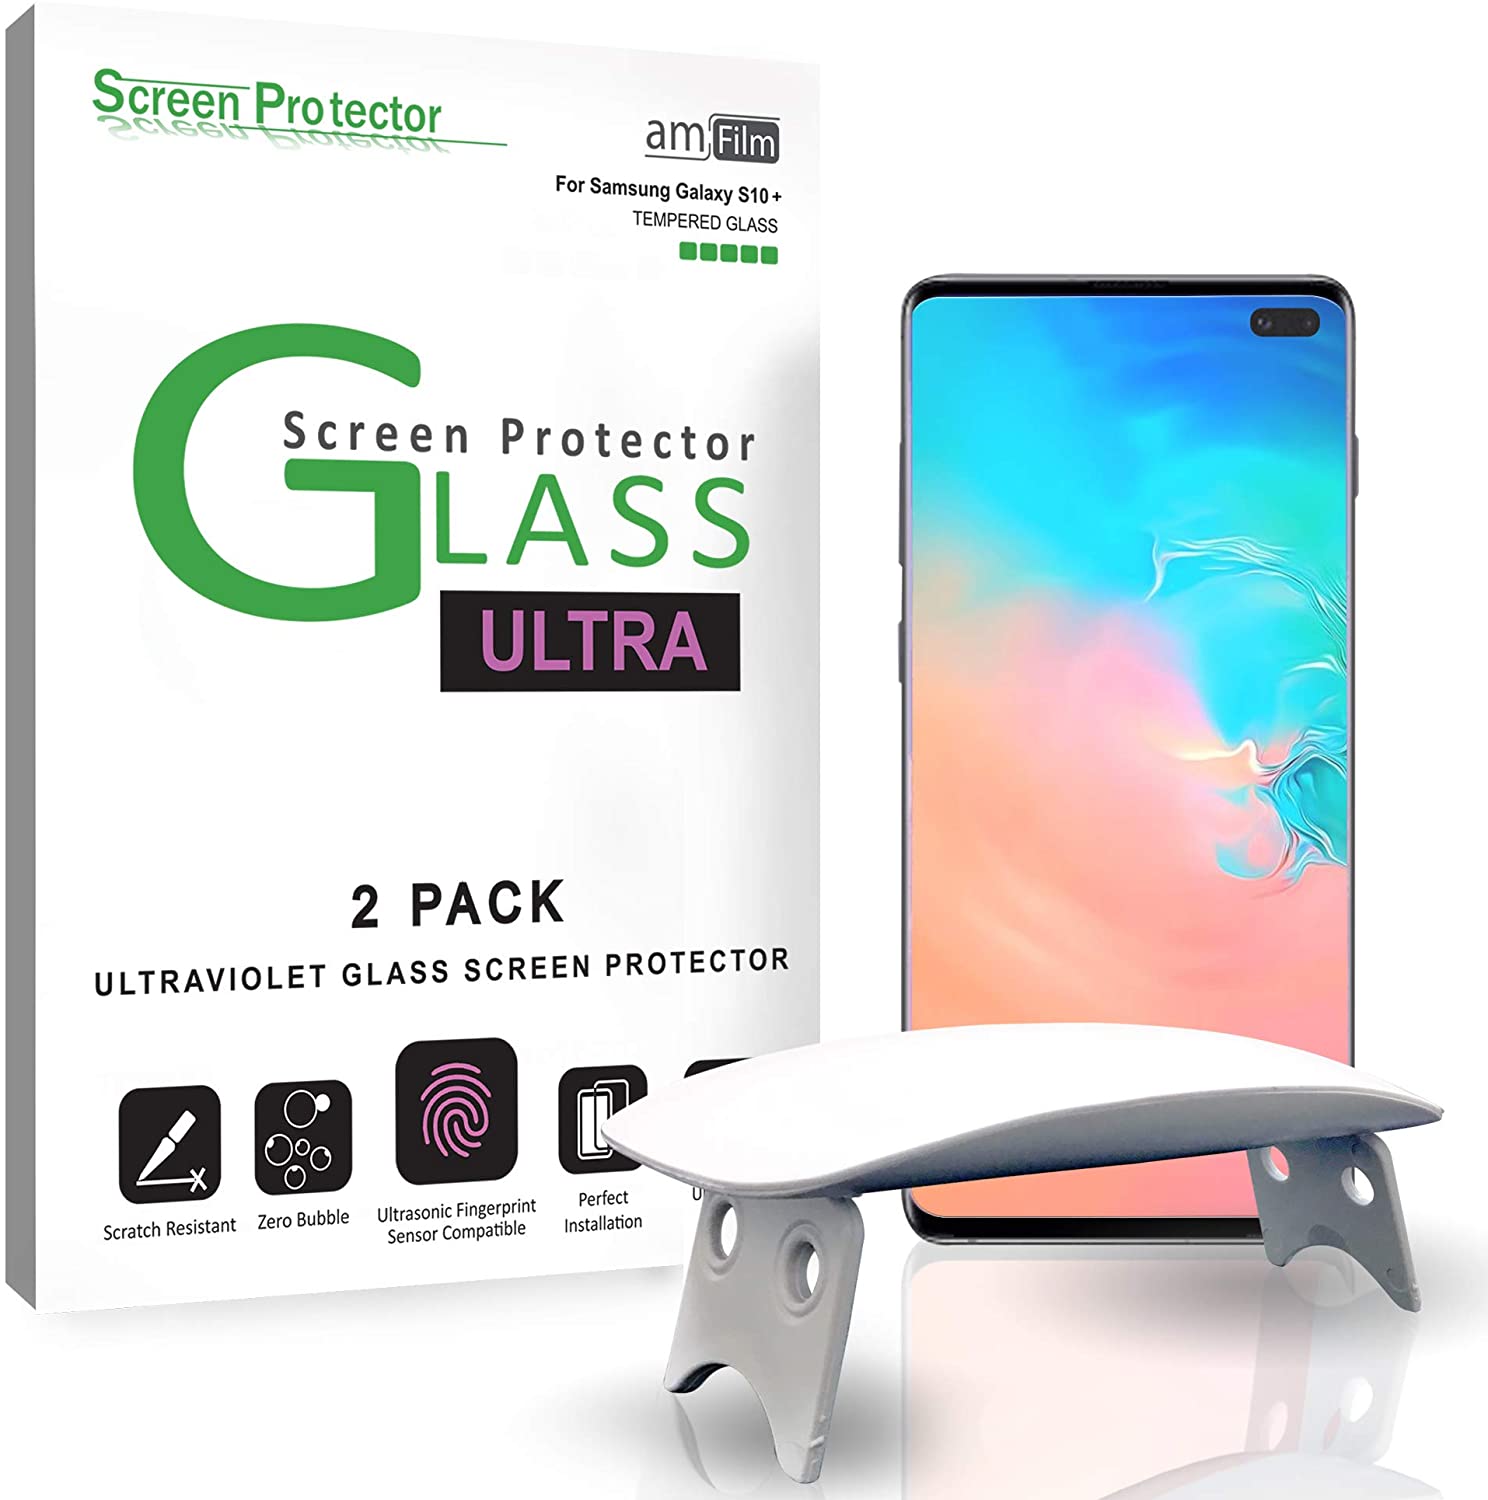 amfilm tempered glass screen protector for the galaxy s10 plus